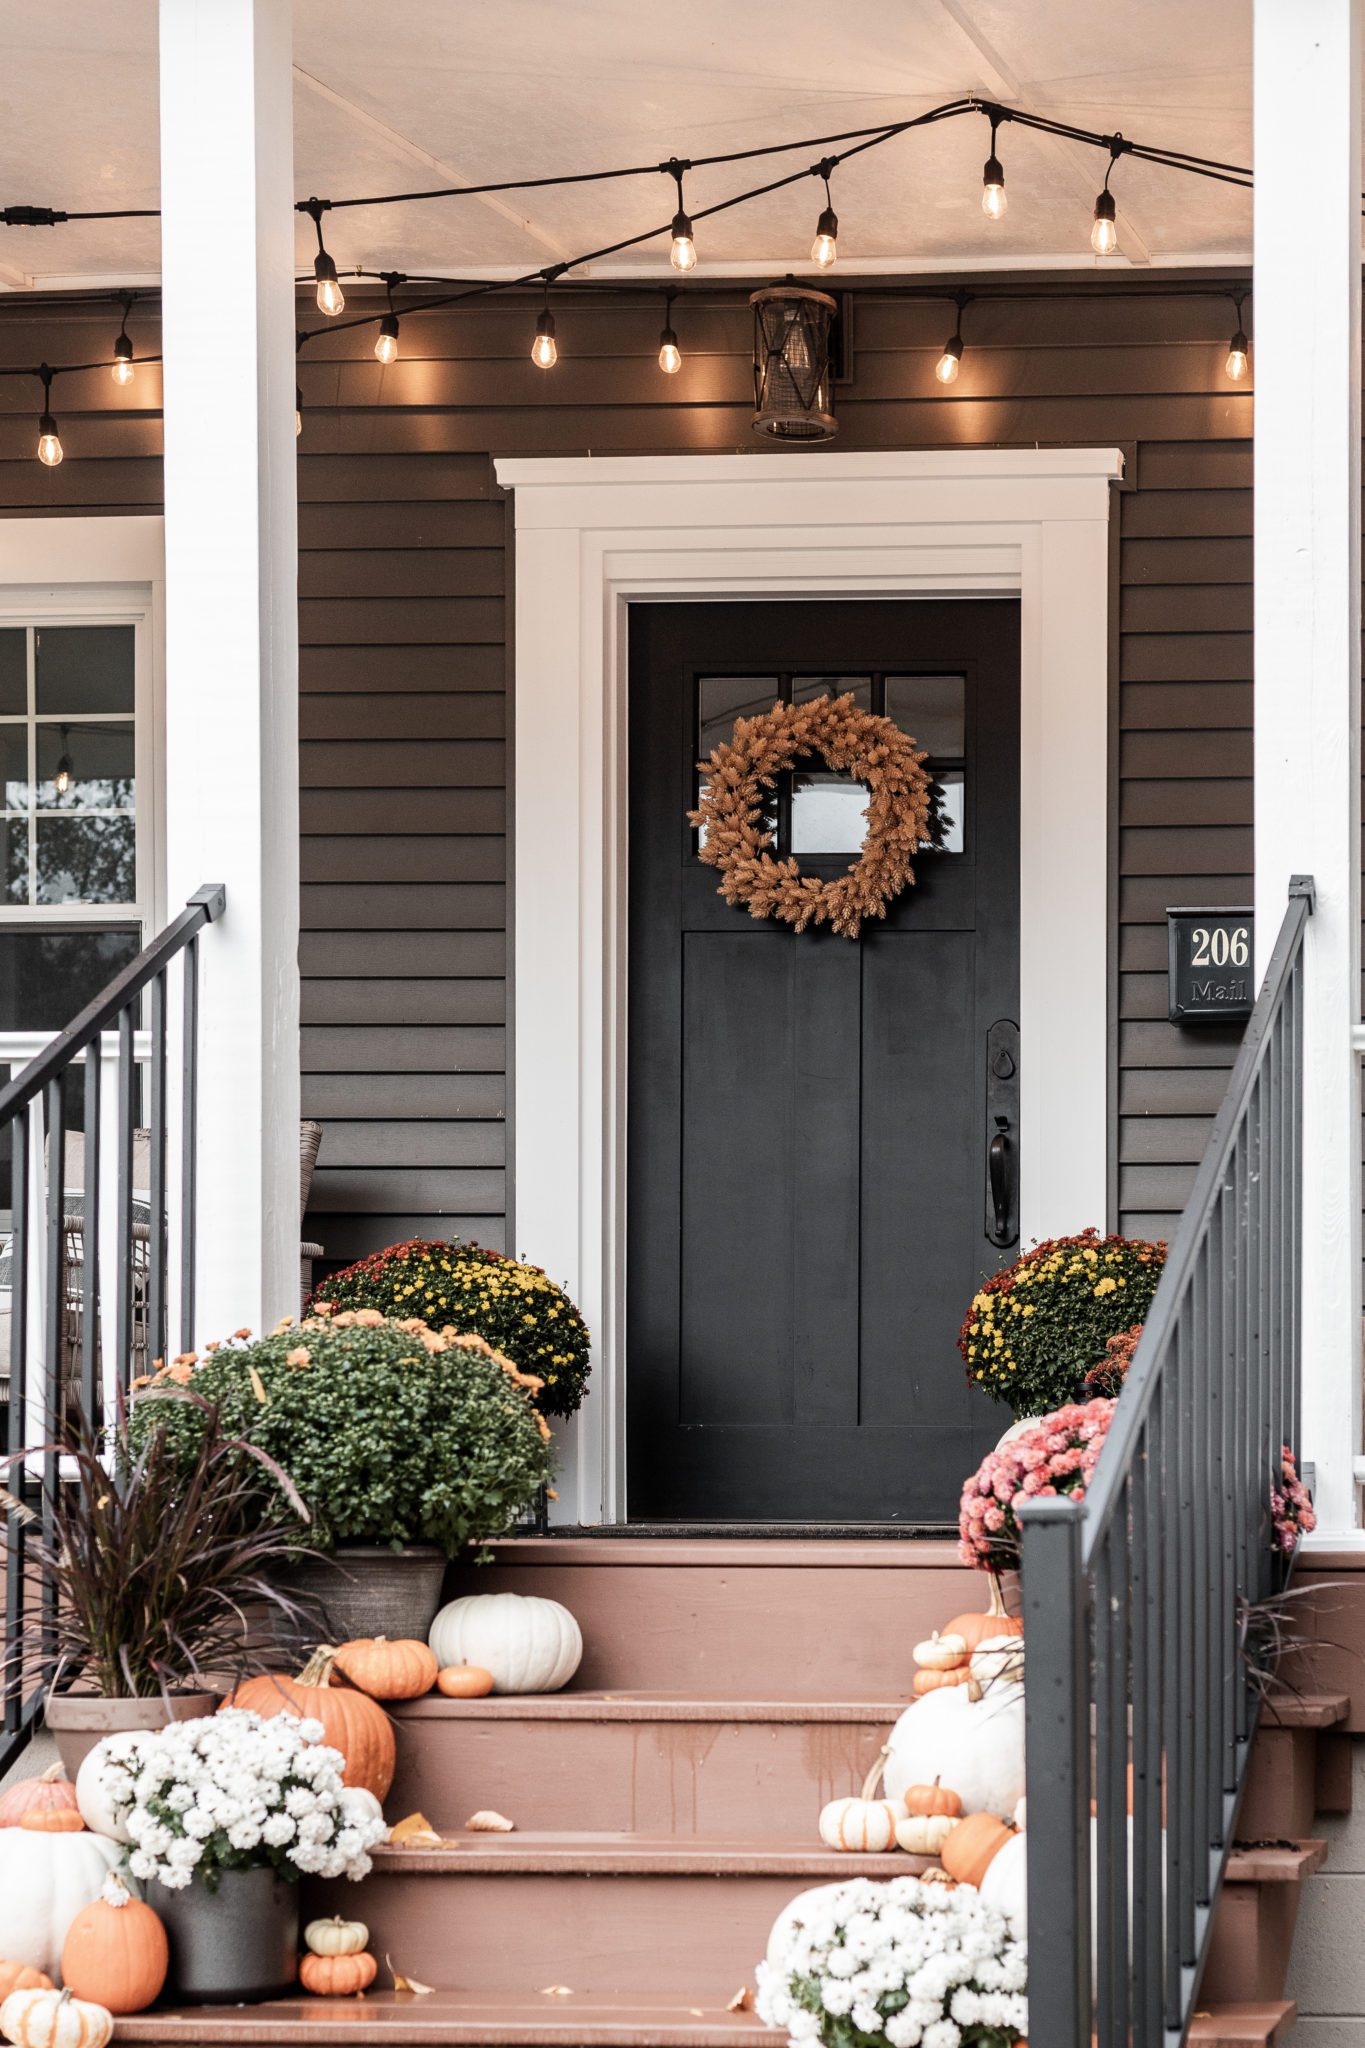 Easy Fall Porch Decor Ideas Anyone Can Do - Cherished Bliss